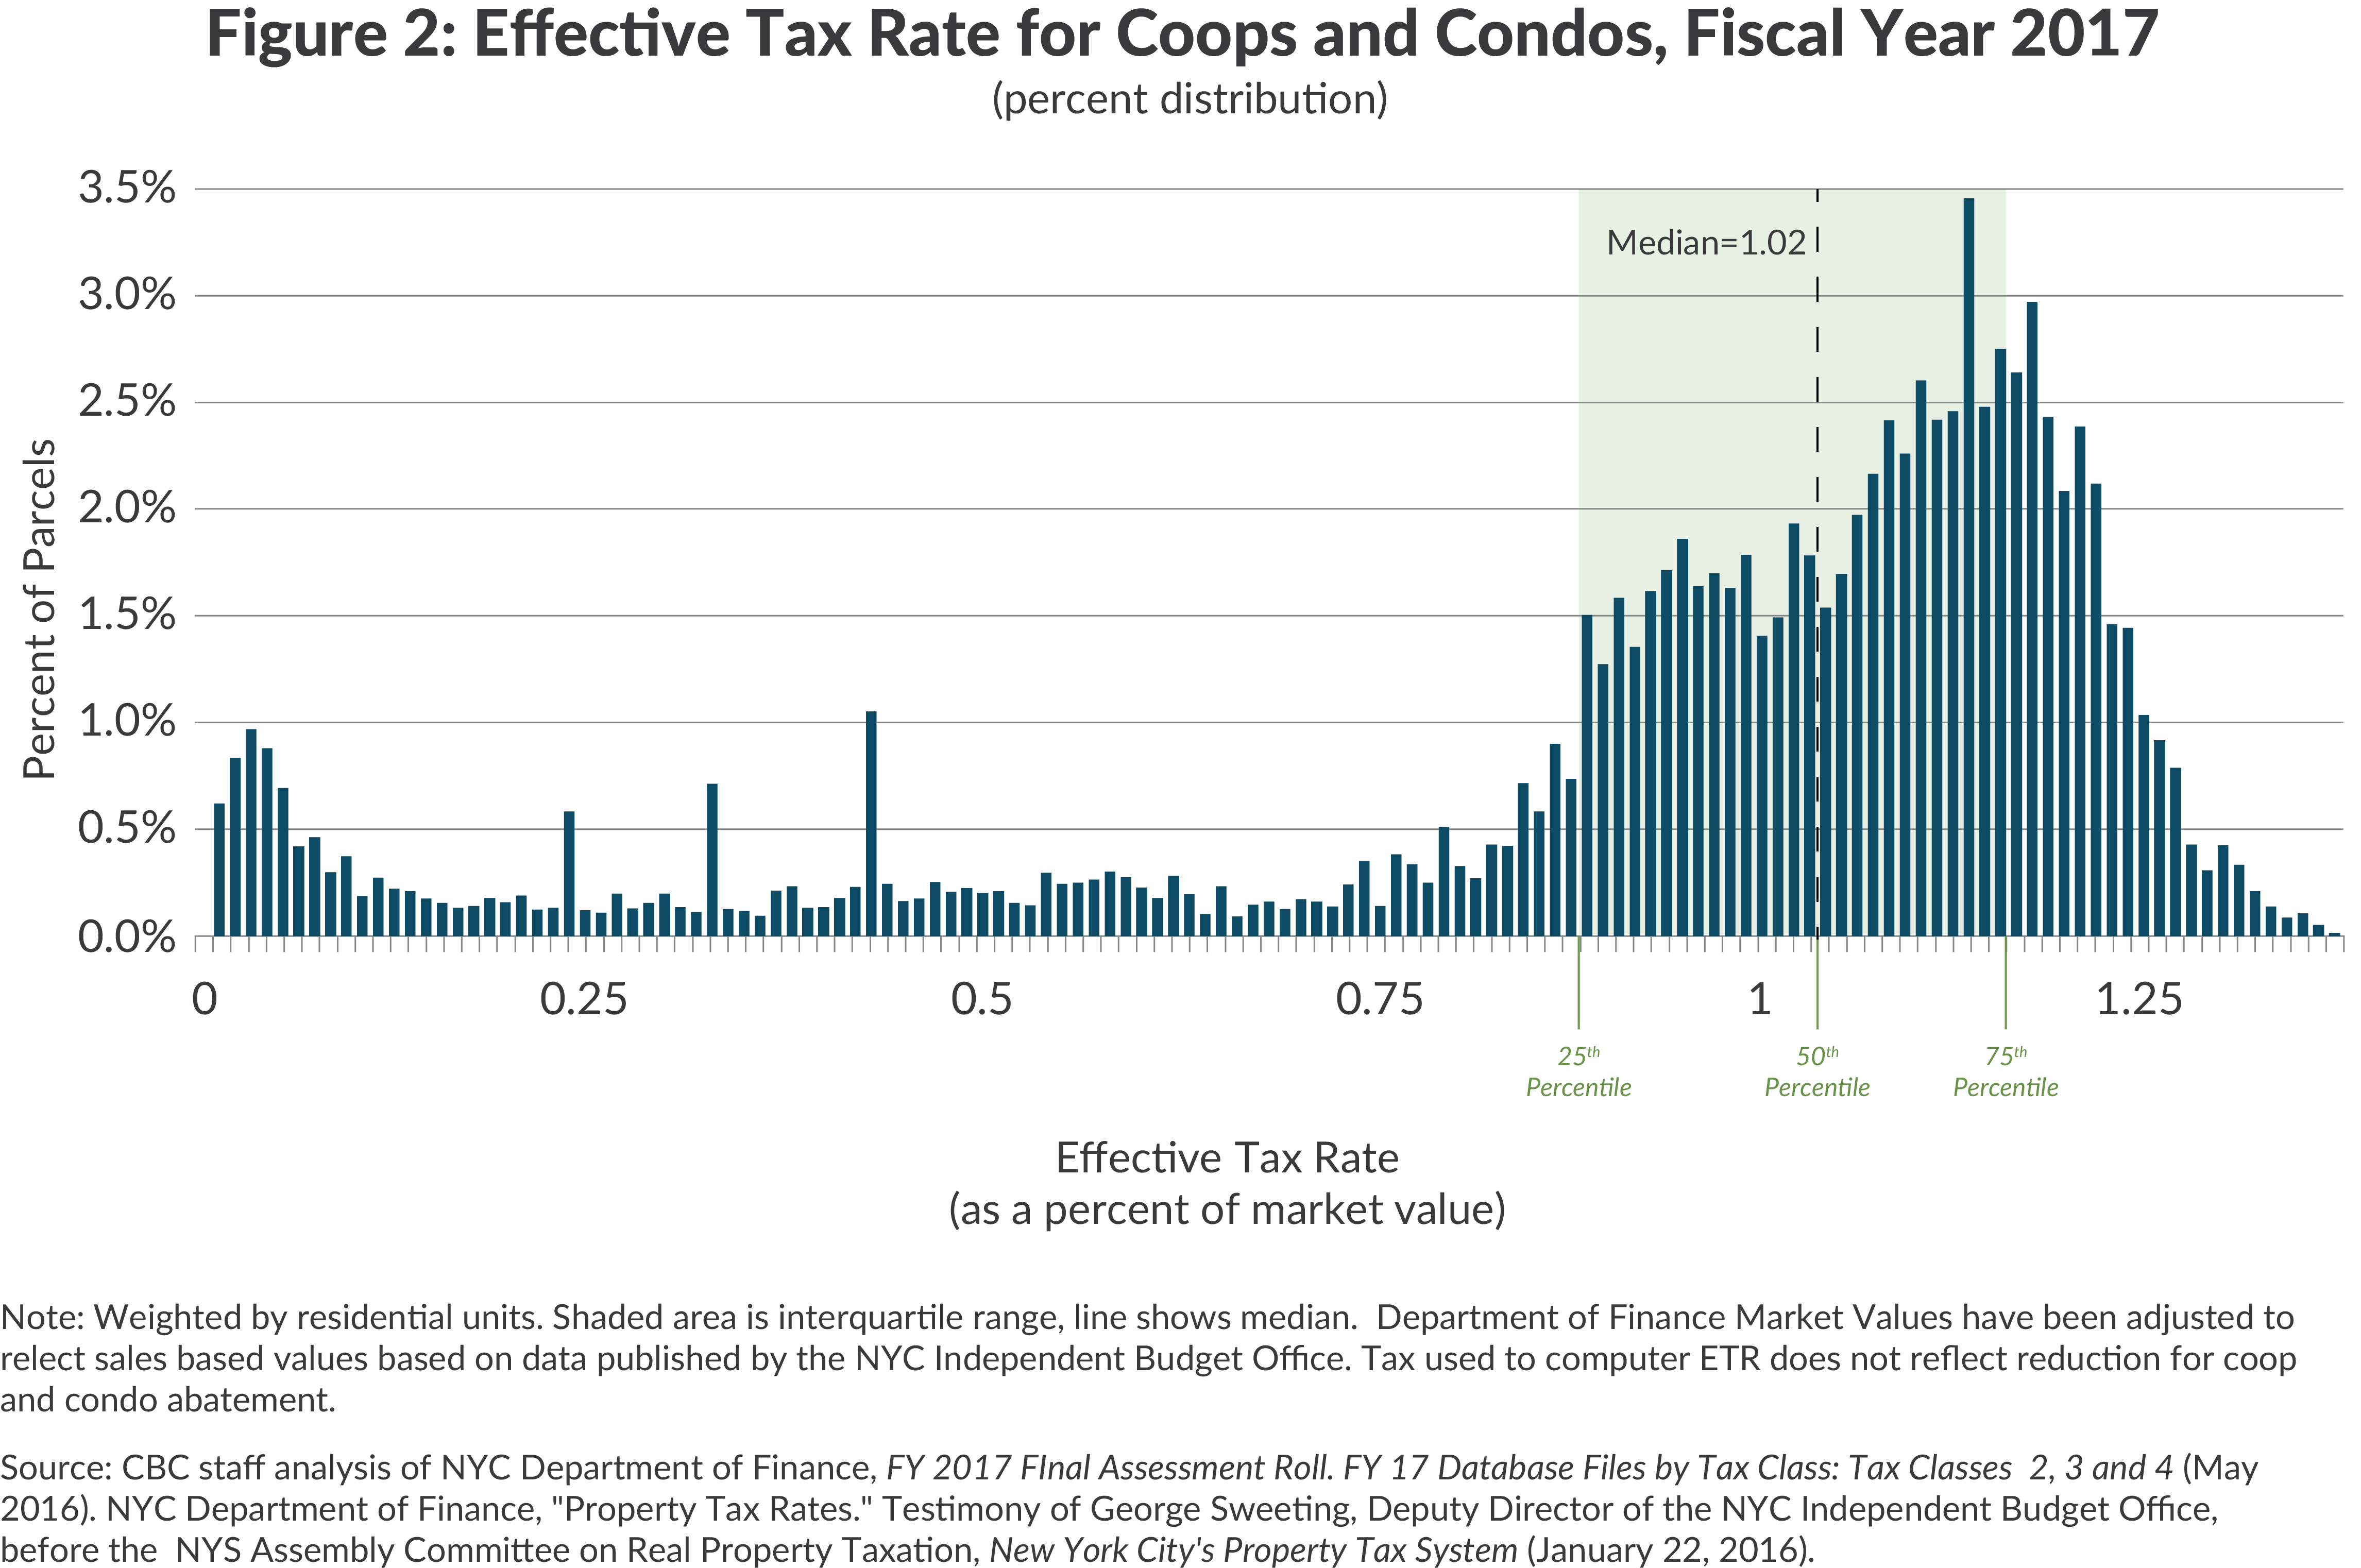 Effective tax rate distribution, NYC coops and condos (class 2)